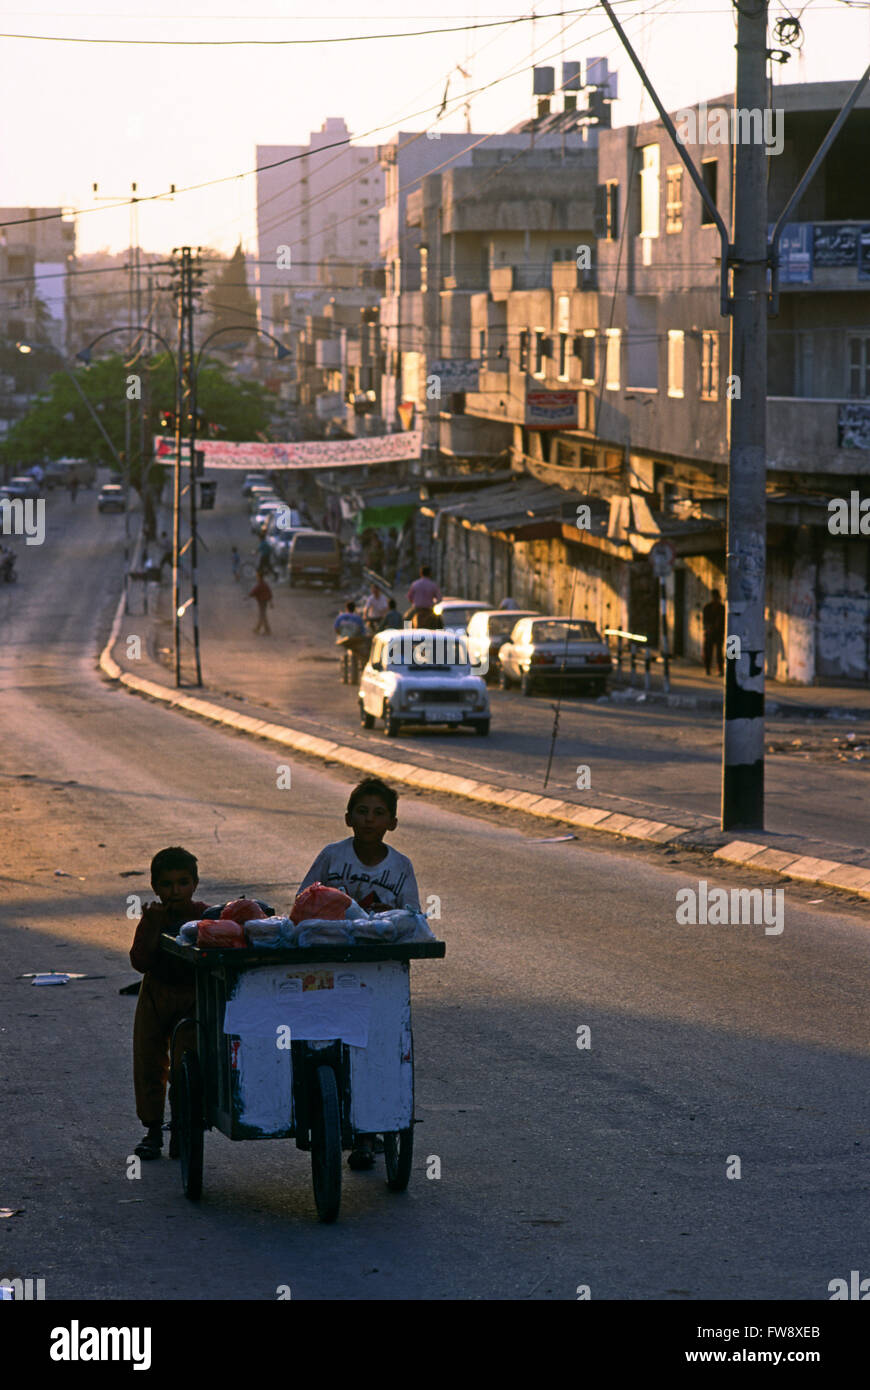 A street scene in Gaza city, Gaza strip contained on the borders of Israel in teh middle east. The scene shopws a typical sunset over a main street in the town with the road strewn with rubbish, old cars and people line the sidewlaks and pavements as the market begins to close down. Stock Photo